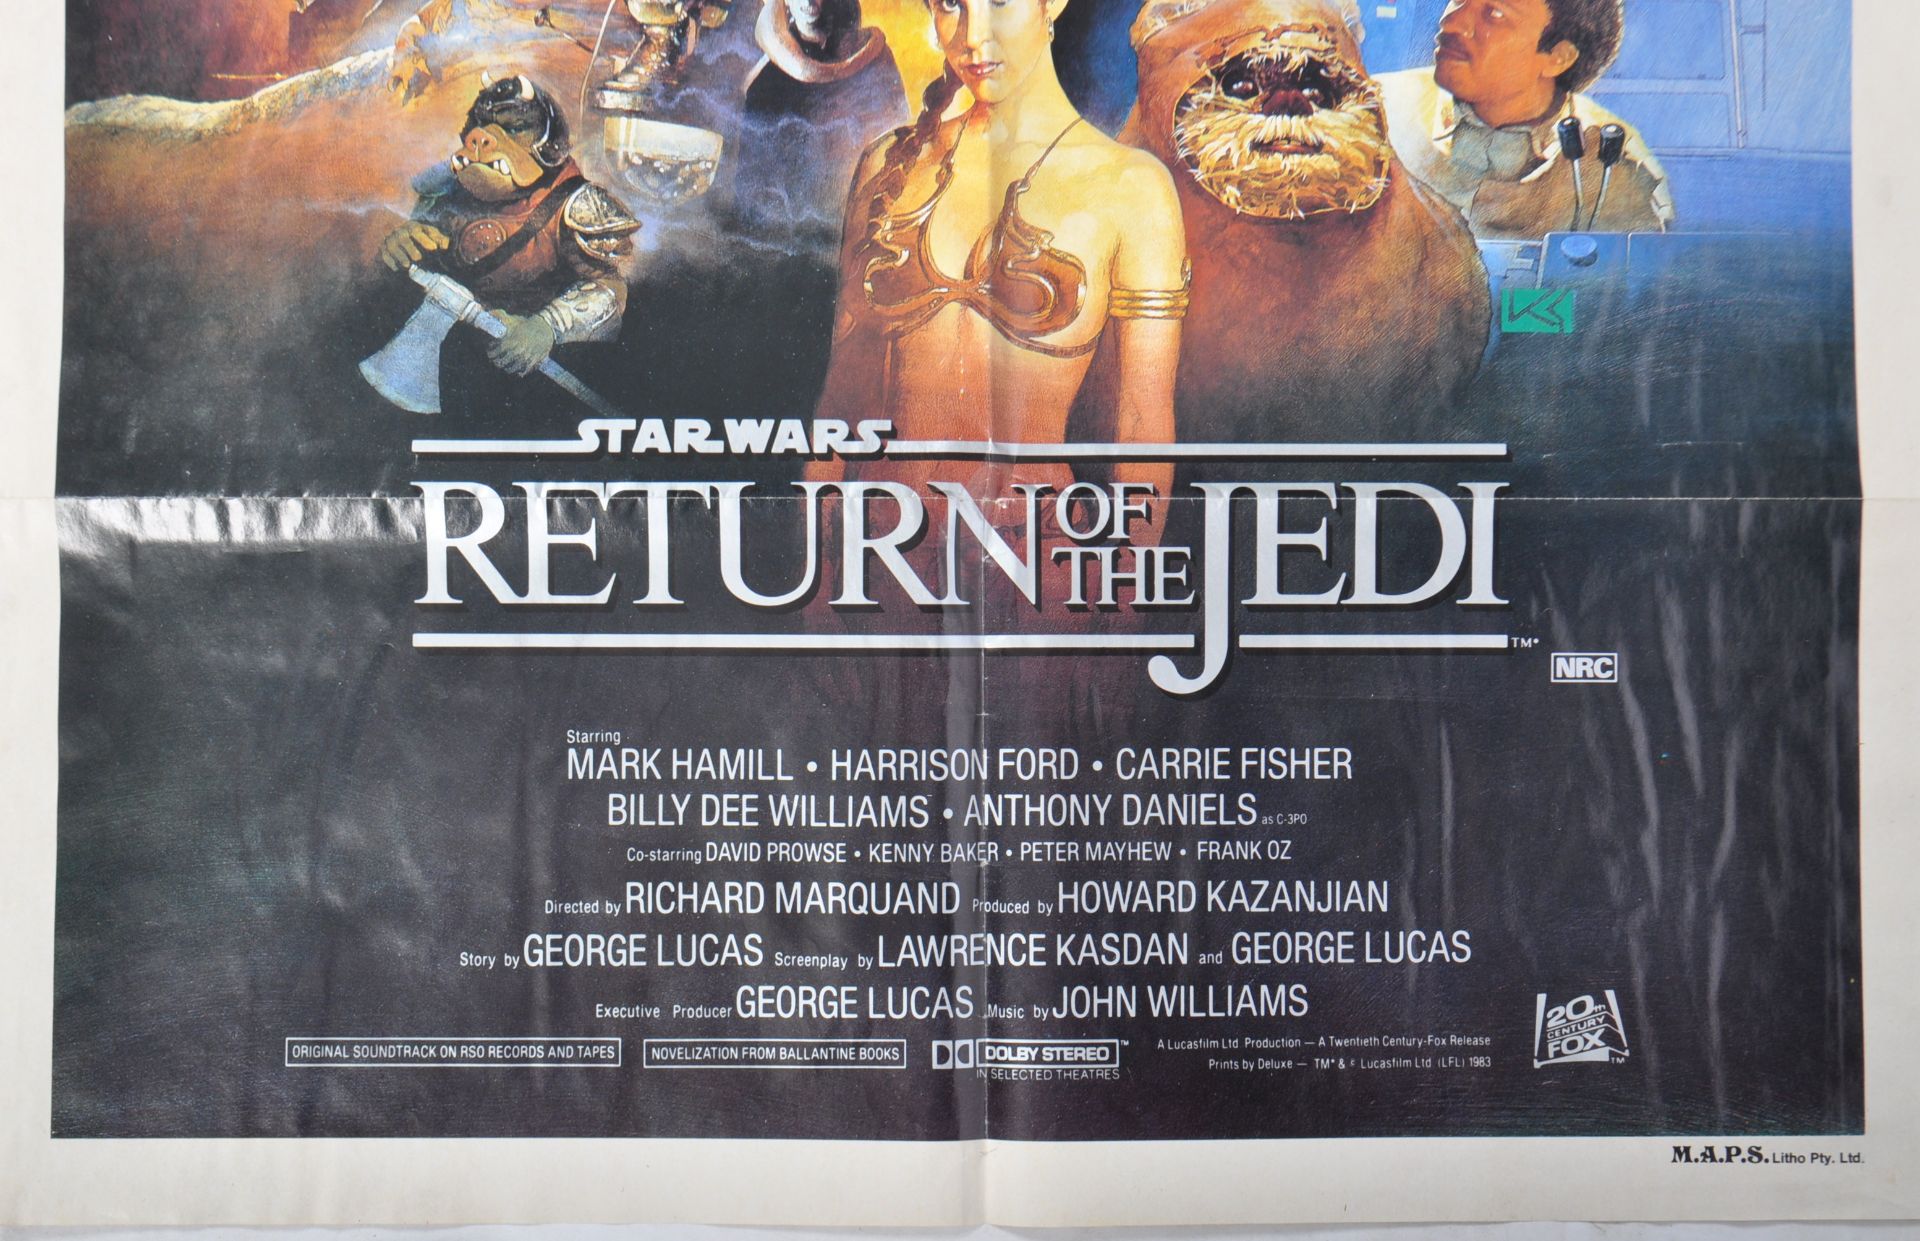 ESTATE OF DAVE PROWSE - AUSTRALIAN ROTJ STAR WARS POSTER - Image 2 of 5